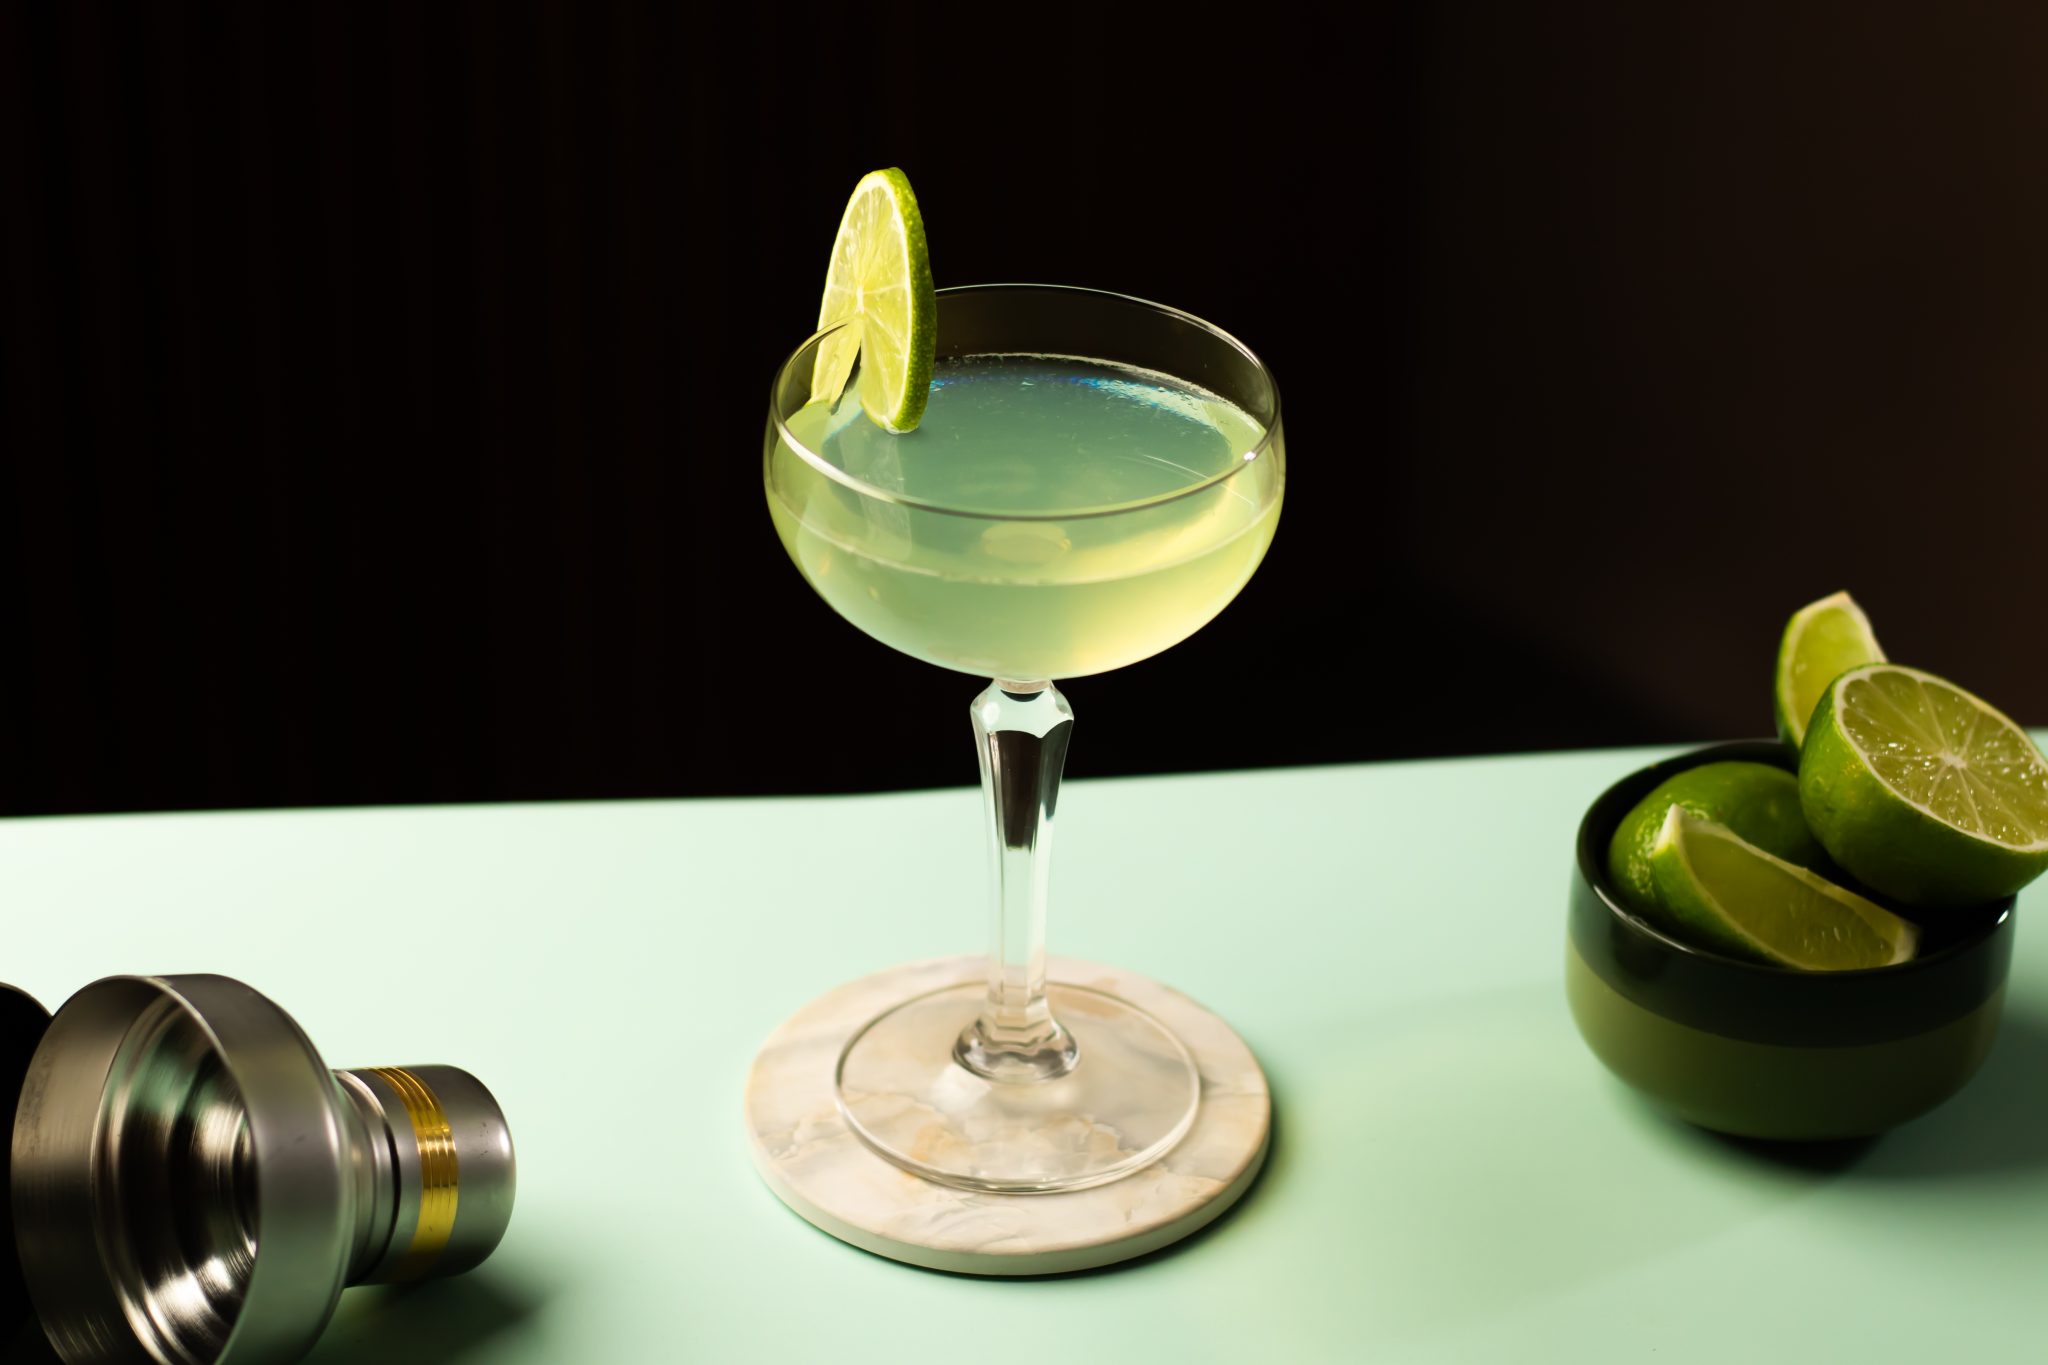 A side shot of a Tequila Gimlet cocktail in a cocktail glass on a white coaster placed on a light green table surrounded by a bowl with limes and a shaker.